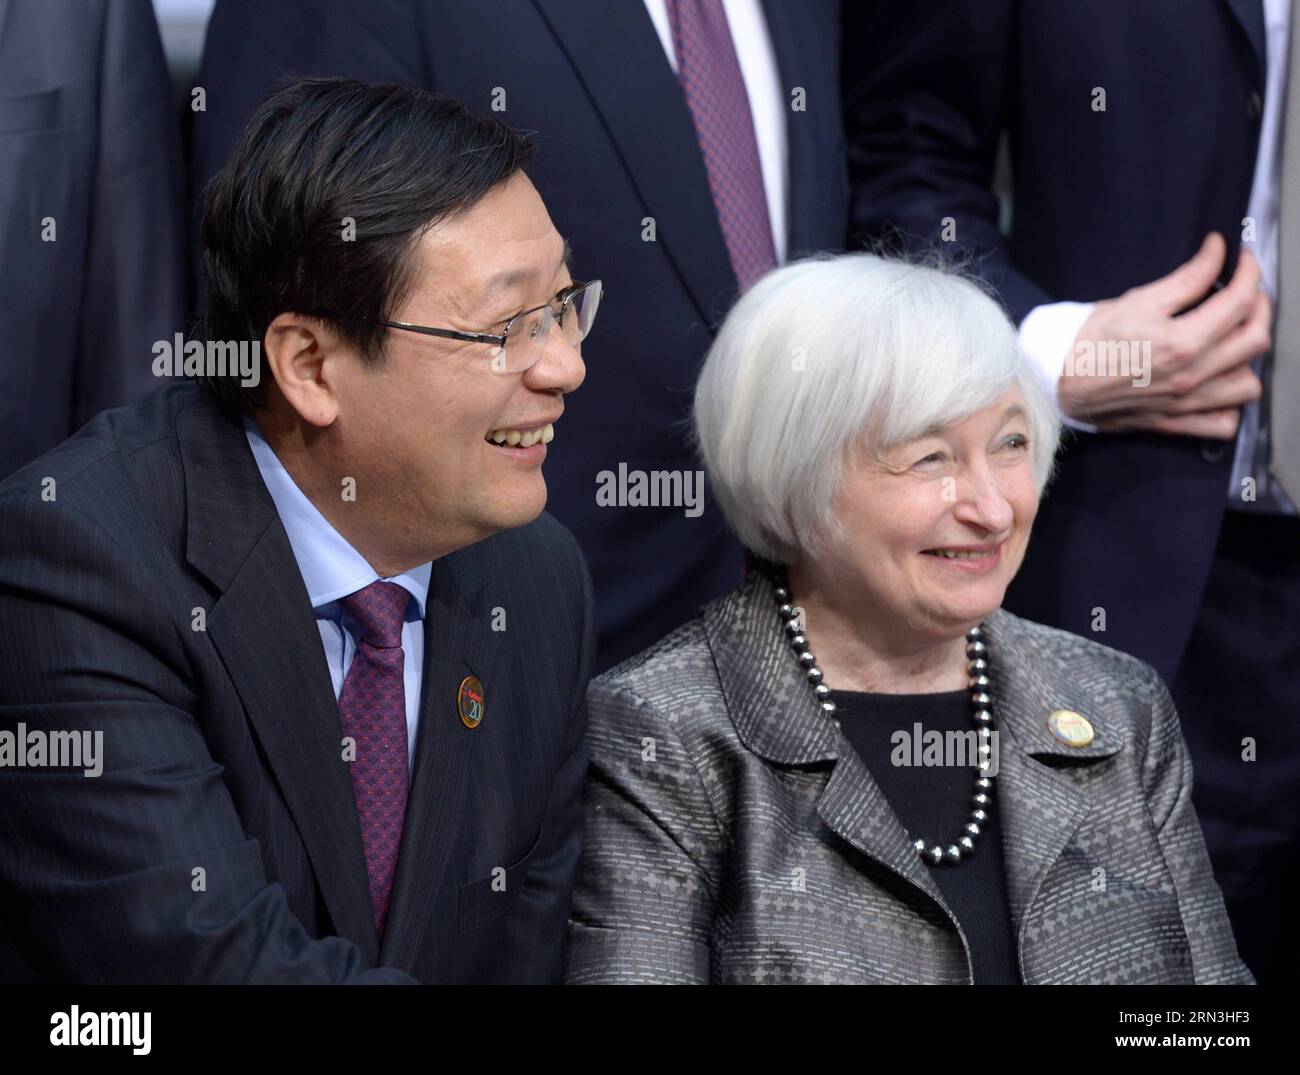 (150417) -- WASHINGTON D.C., April 17, 2015 -- Chinese finance minister Lou Jiwei(L) and U.S. Federal Reserve Chair Janet Yellen are seen before a family photo during the meeting of G20 finance ministers and central bank governors in Washington D.C., capital of the United States, April 17, 2015. The Group of 20 leading economies (G20) remained deeply disappointed with the continued delay in progressing the 2010 International Monetary Fund (IMF) quota reform, G20 finance ministers and central bank governors said in a communique on Friday. ) U.S.-WASHINGTON-WORLD BANK GROUP-IMF-ANNUAL MEETINGS Y Stock Photo